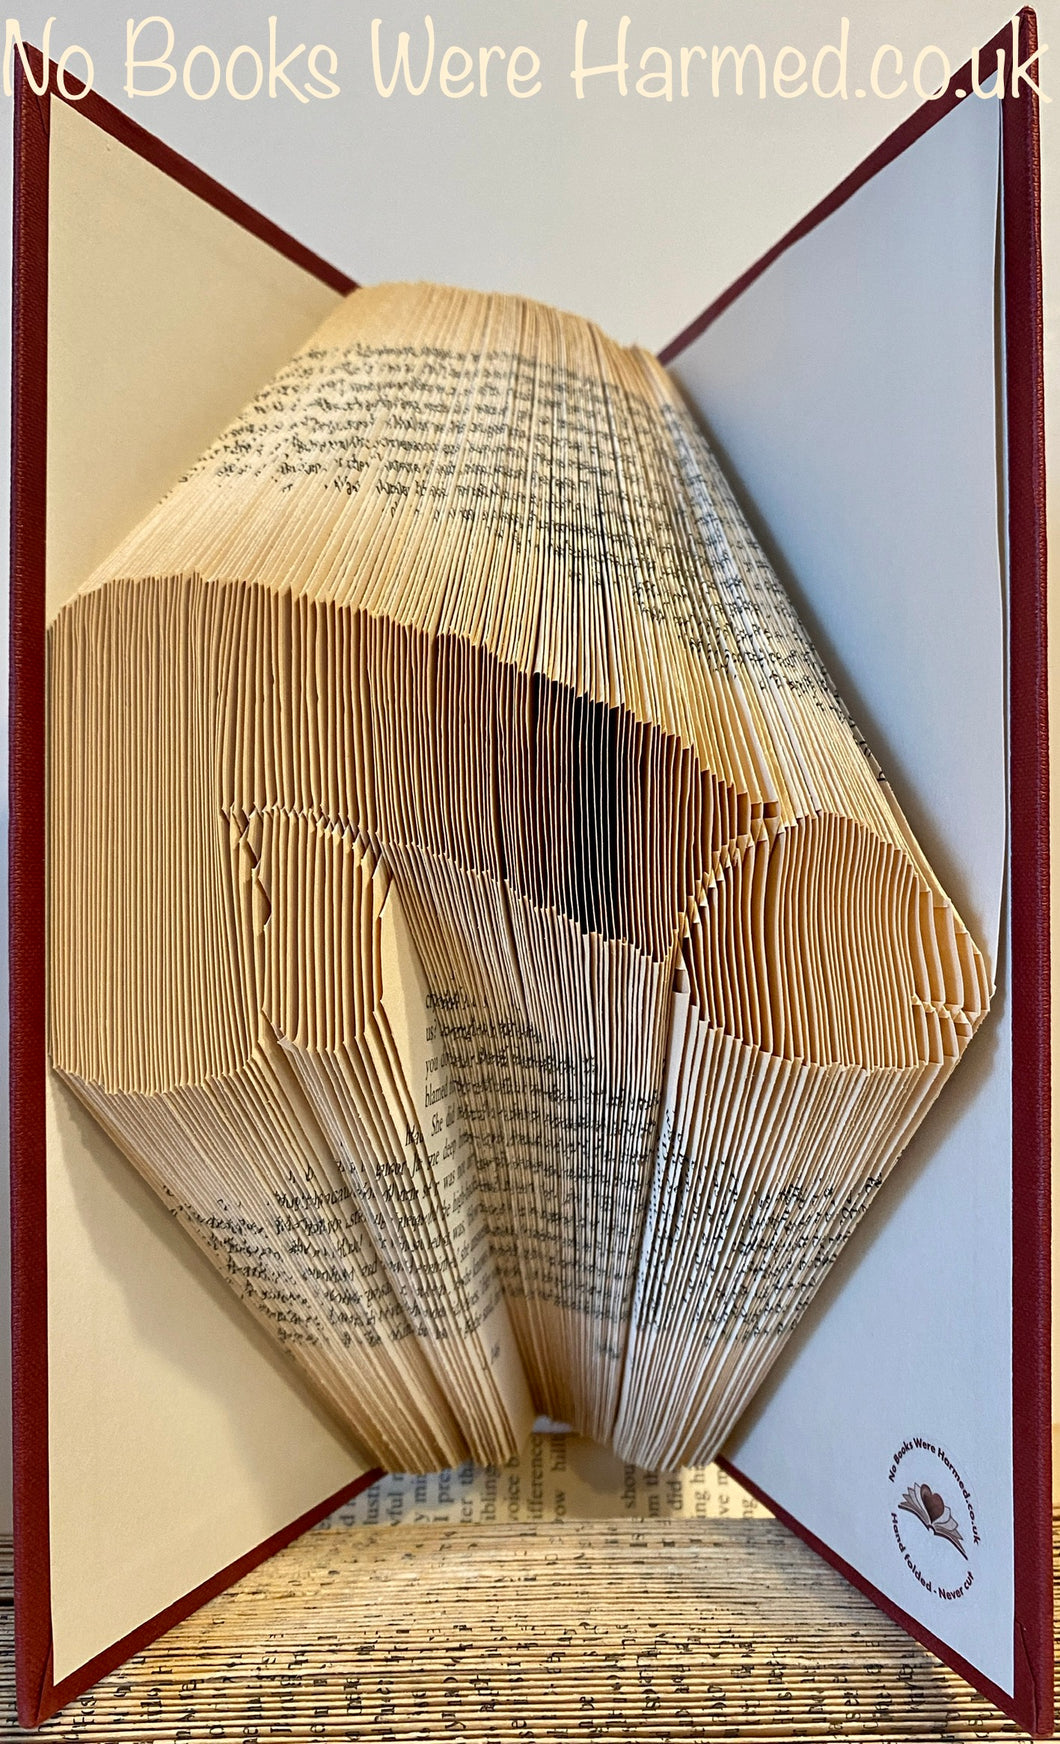 Click to view : : Crude Books by No Books Were Harmed.co.uk : : Hand folded book art : : Penis Willy Cock